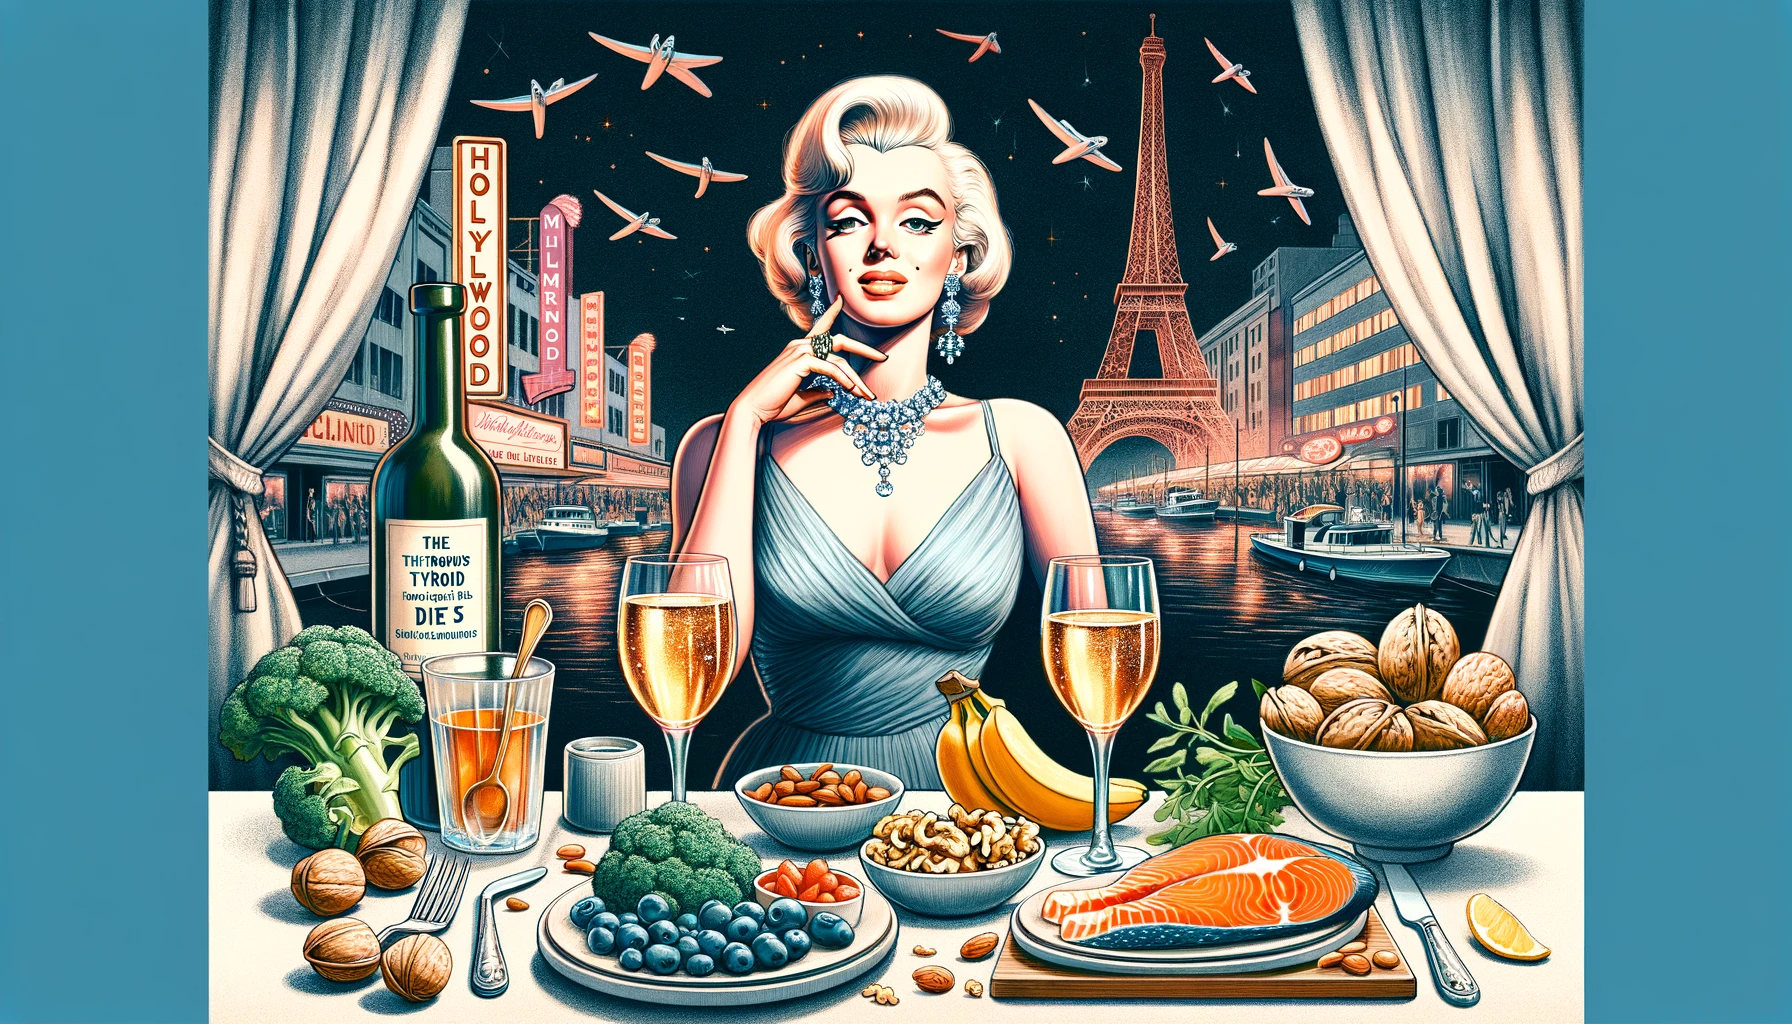 Marilyn Monroe's Thyroid Diet: The Hollywood Connection